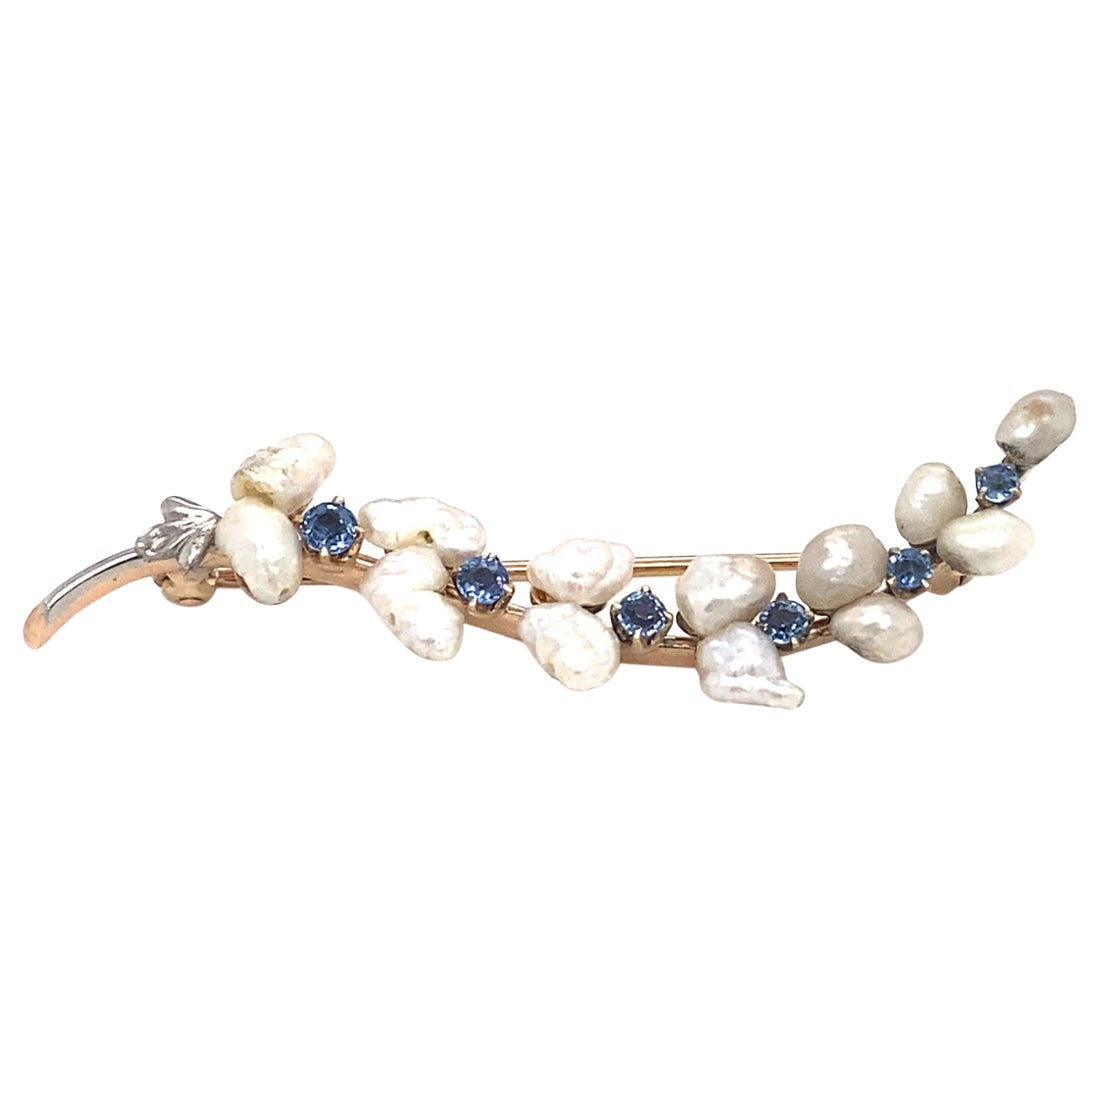 Circa 1890s Victorian Natural Pearl and Sapphire Brooch in 14 Karat Gold